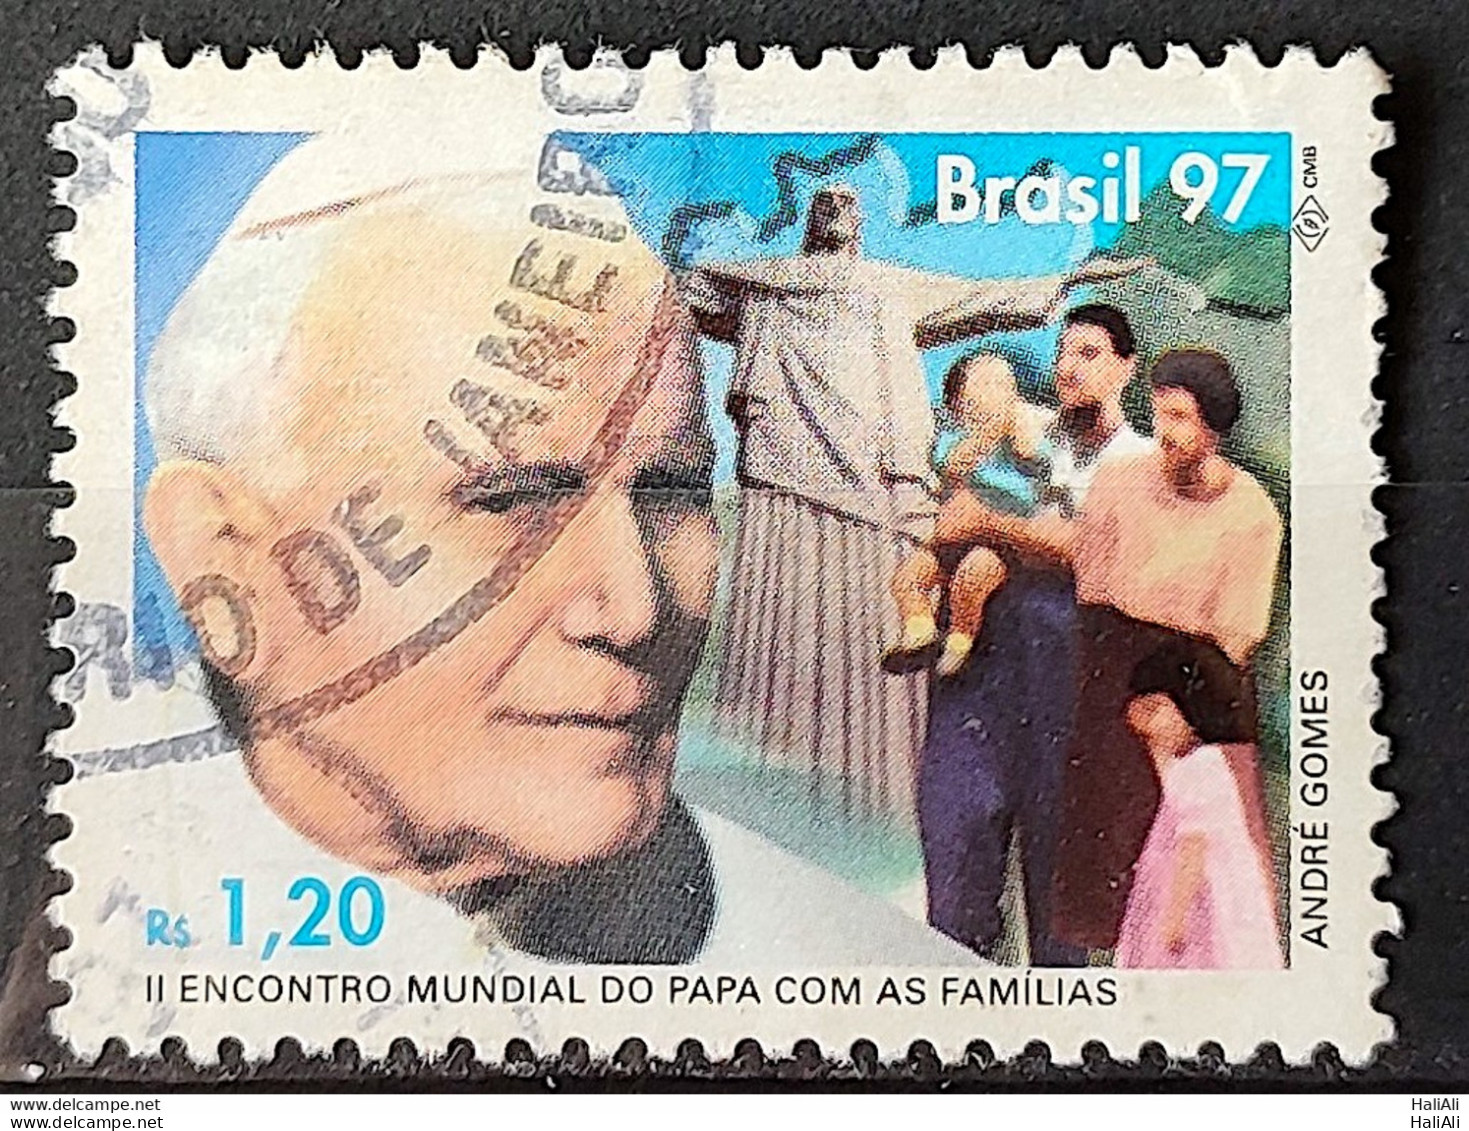 C 2043 Brazil Stamp World Pope Meeting With Families Religion 1997 Circulated 10 - Used Stamps